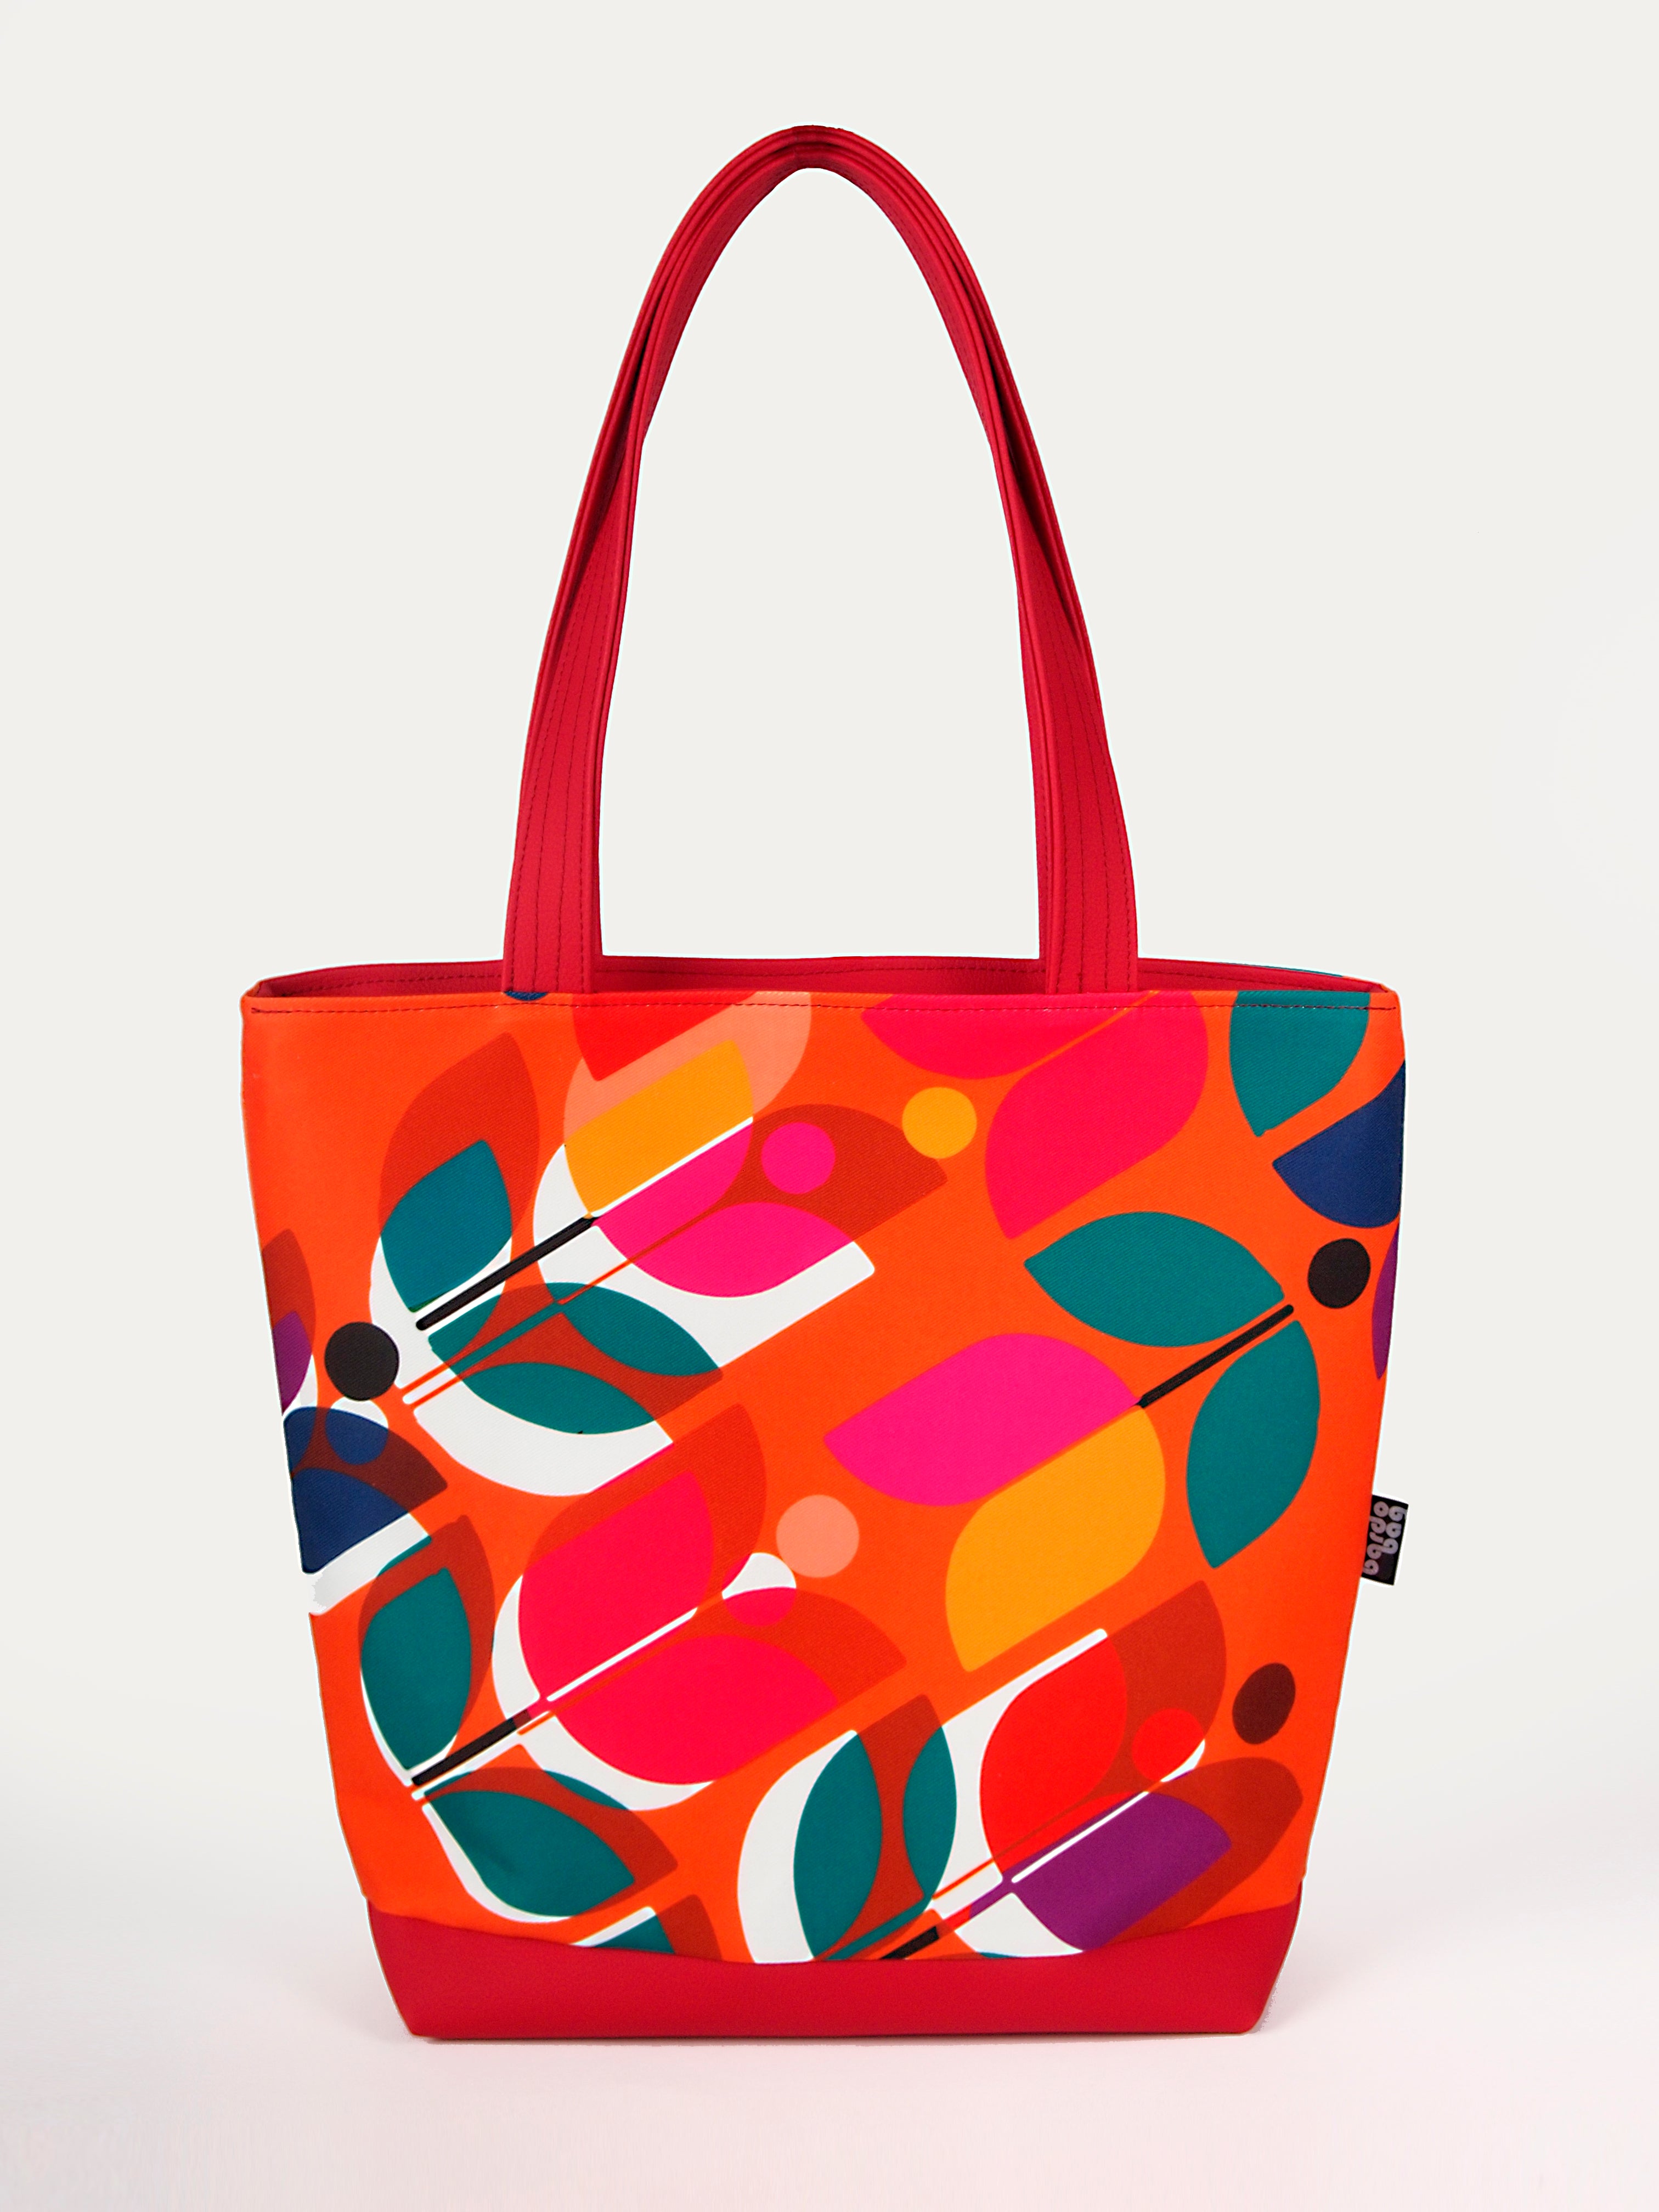 Bardo large tote bag - Song of the tulips - Premium large tote bag from Bardo bag - Just lvabstract, art bag, black, floral, flower, geometric abstraction, gift, green, handemade, large, nature, pink, purple, red, tablet, tote bag, tulips, vegan leather, woman, work bag89.00! Shop now at BARDO ART WORKS